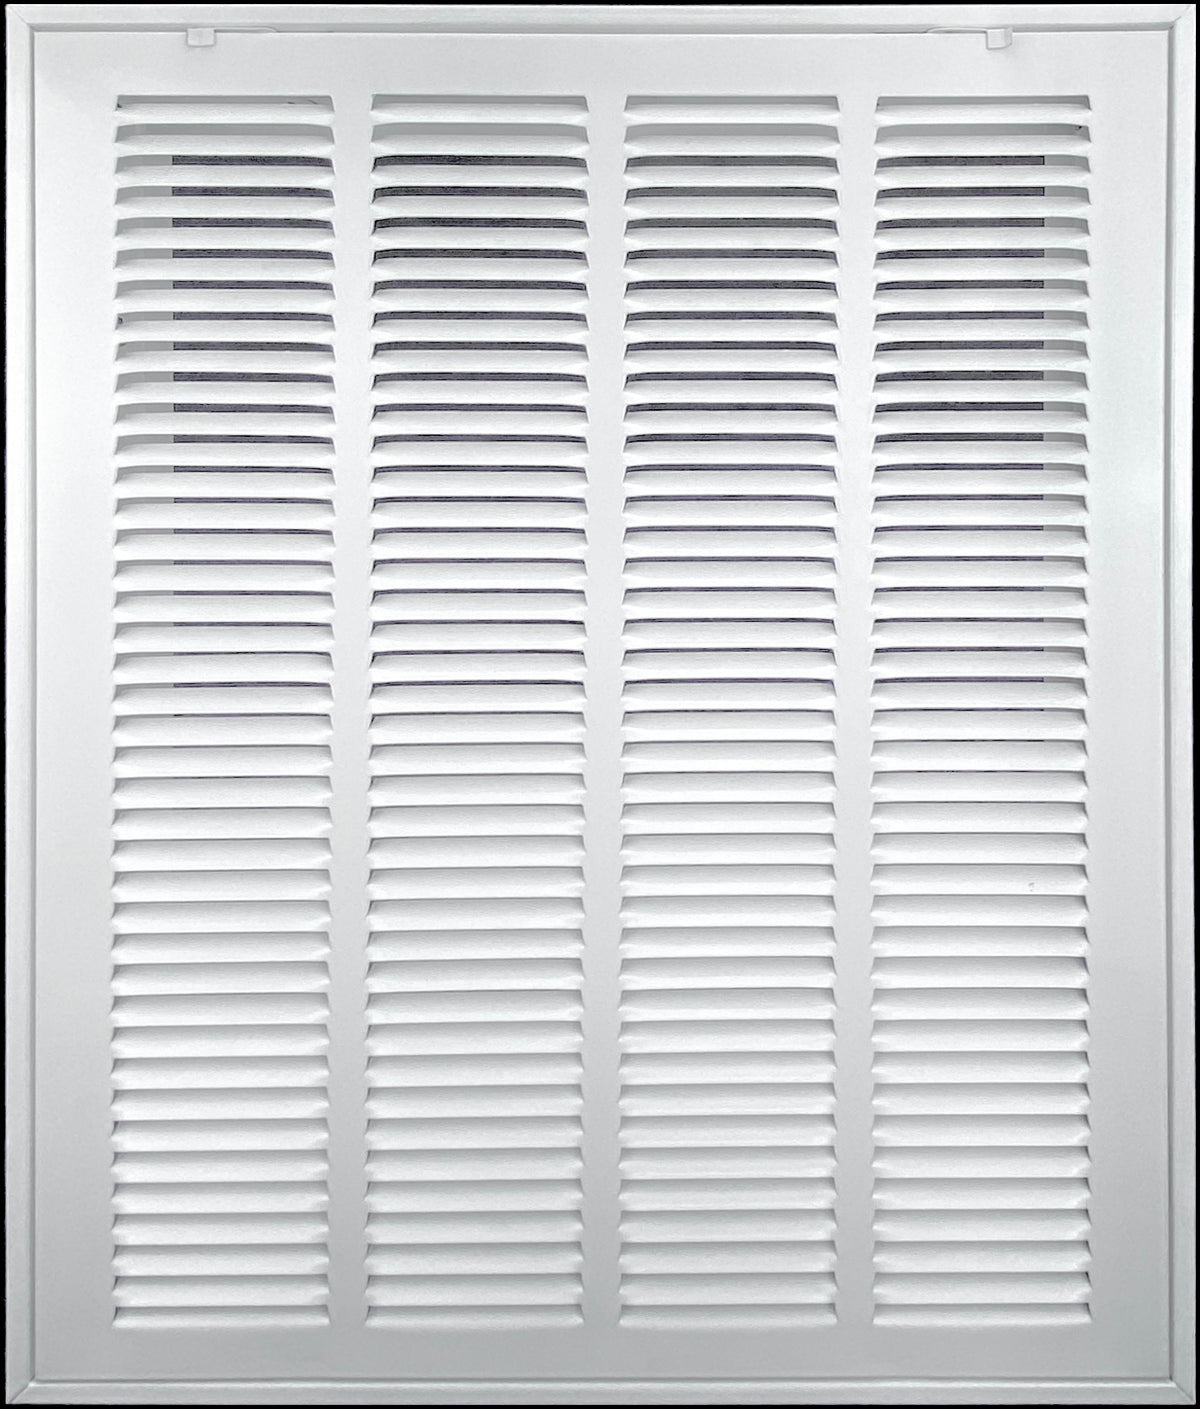 airgrilles 16" x 20" duct opening   hd steel return air filter grille for sidewall and ceiling  agc  7agc-1raf-wh-16x20 756014649413 - 1